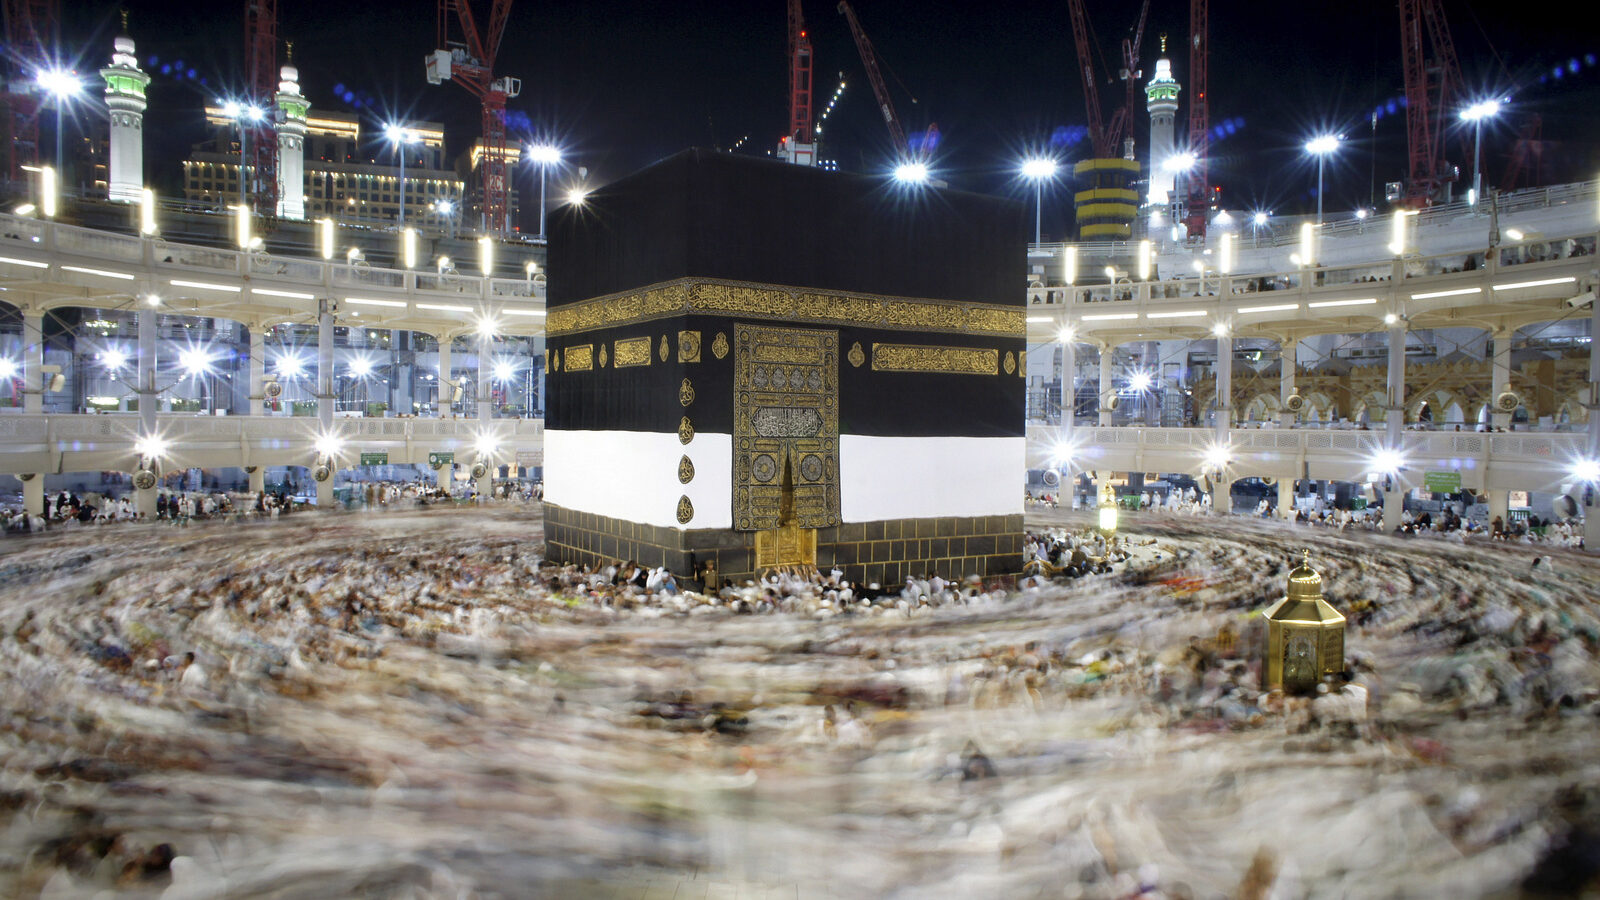 In this Wednesday, Sept. 9, 2015 photo, Muslim pilgrims circumambulate around the Kaaba, the cubic building at the Grand Mosque in the Muslim holy city of Mecca, Saudi Arabia. Thousands of Muslims from all over the world have arrived in Saudi Arabia for the annual hajj, or pilgrimage, to Mecca. Every Muslim is required to perform the hajj, or pilgrimage, to Mecca at least once in his or her lifetime if able to do so. (AP Photo/Amr Nabil)